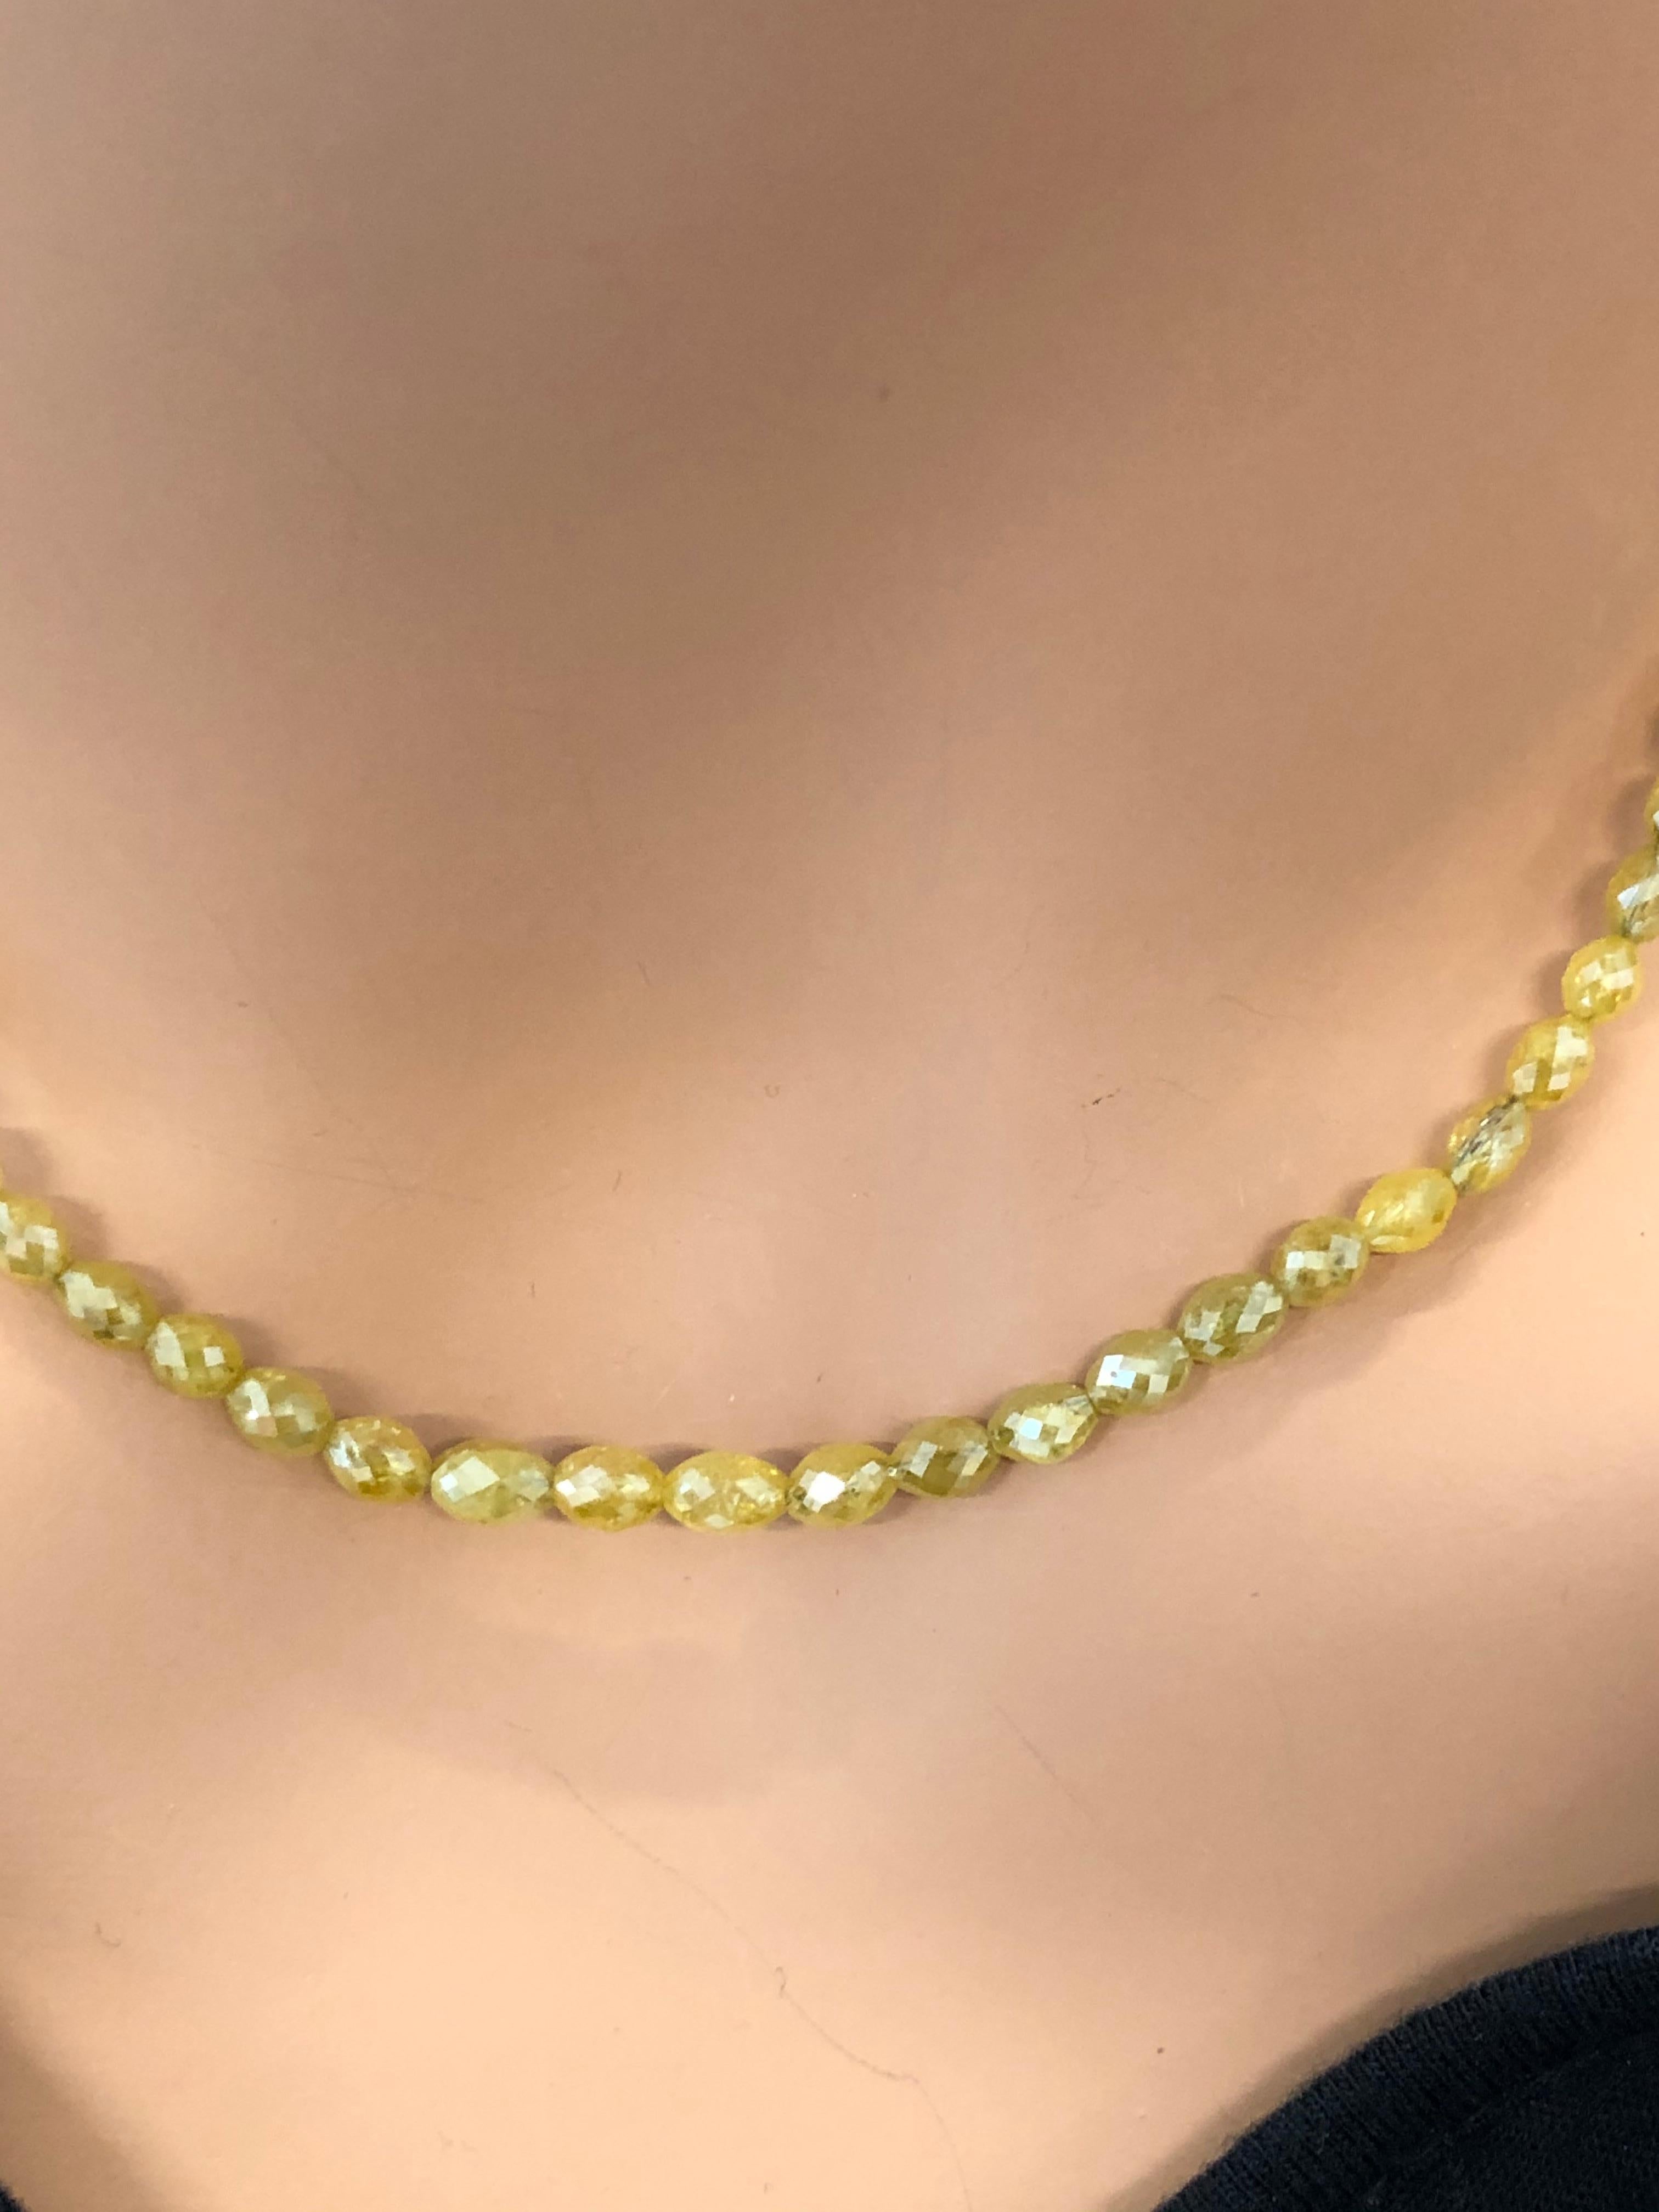 Contemporary 38 Carat Natural Fancy Yellow Diamond Briolette Necklace in 14 Karat Gold